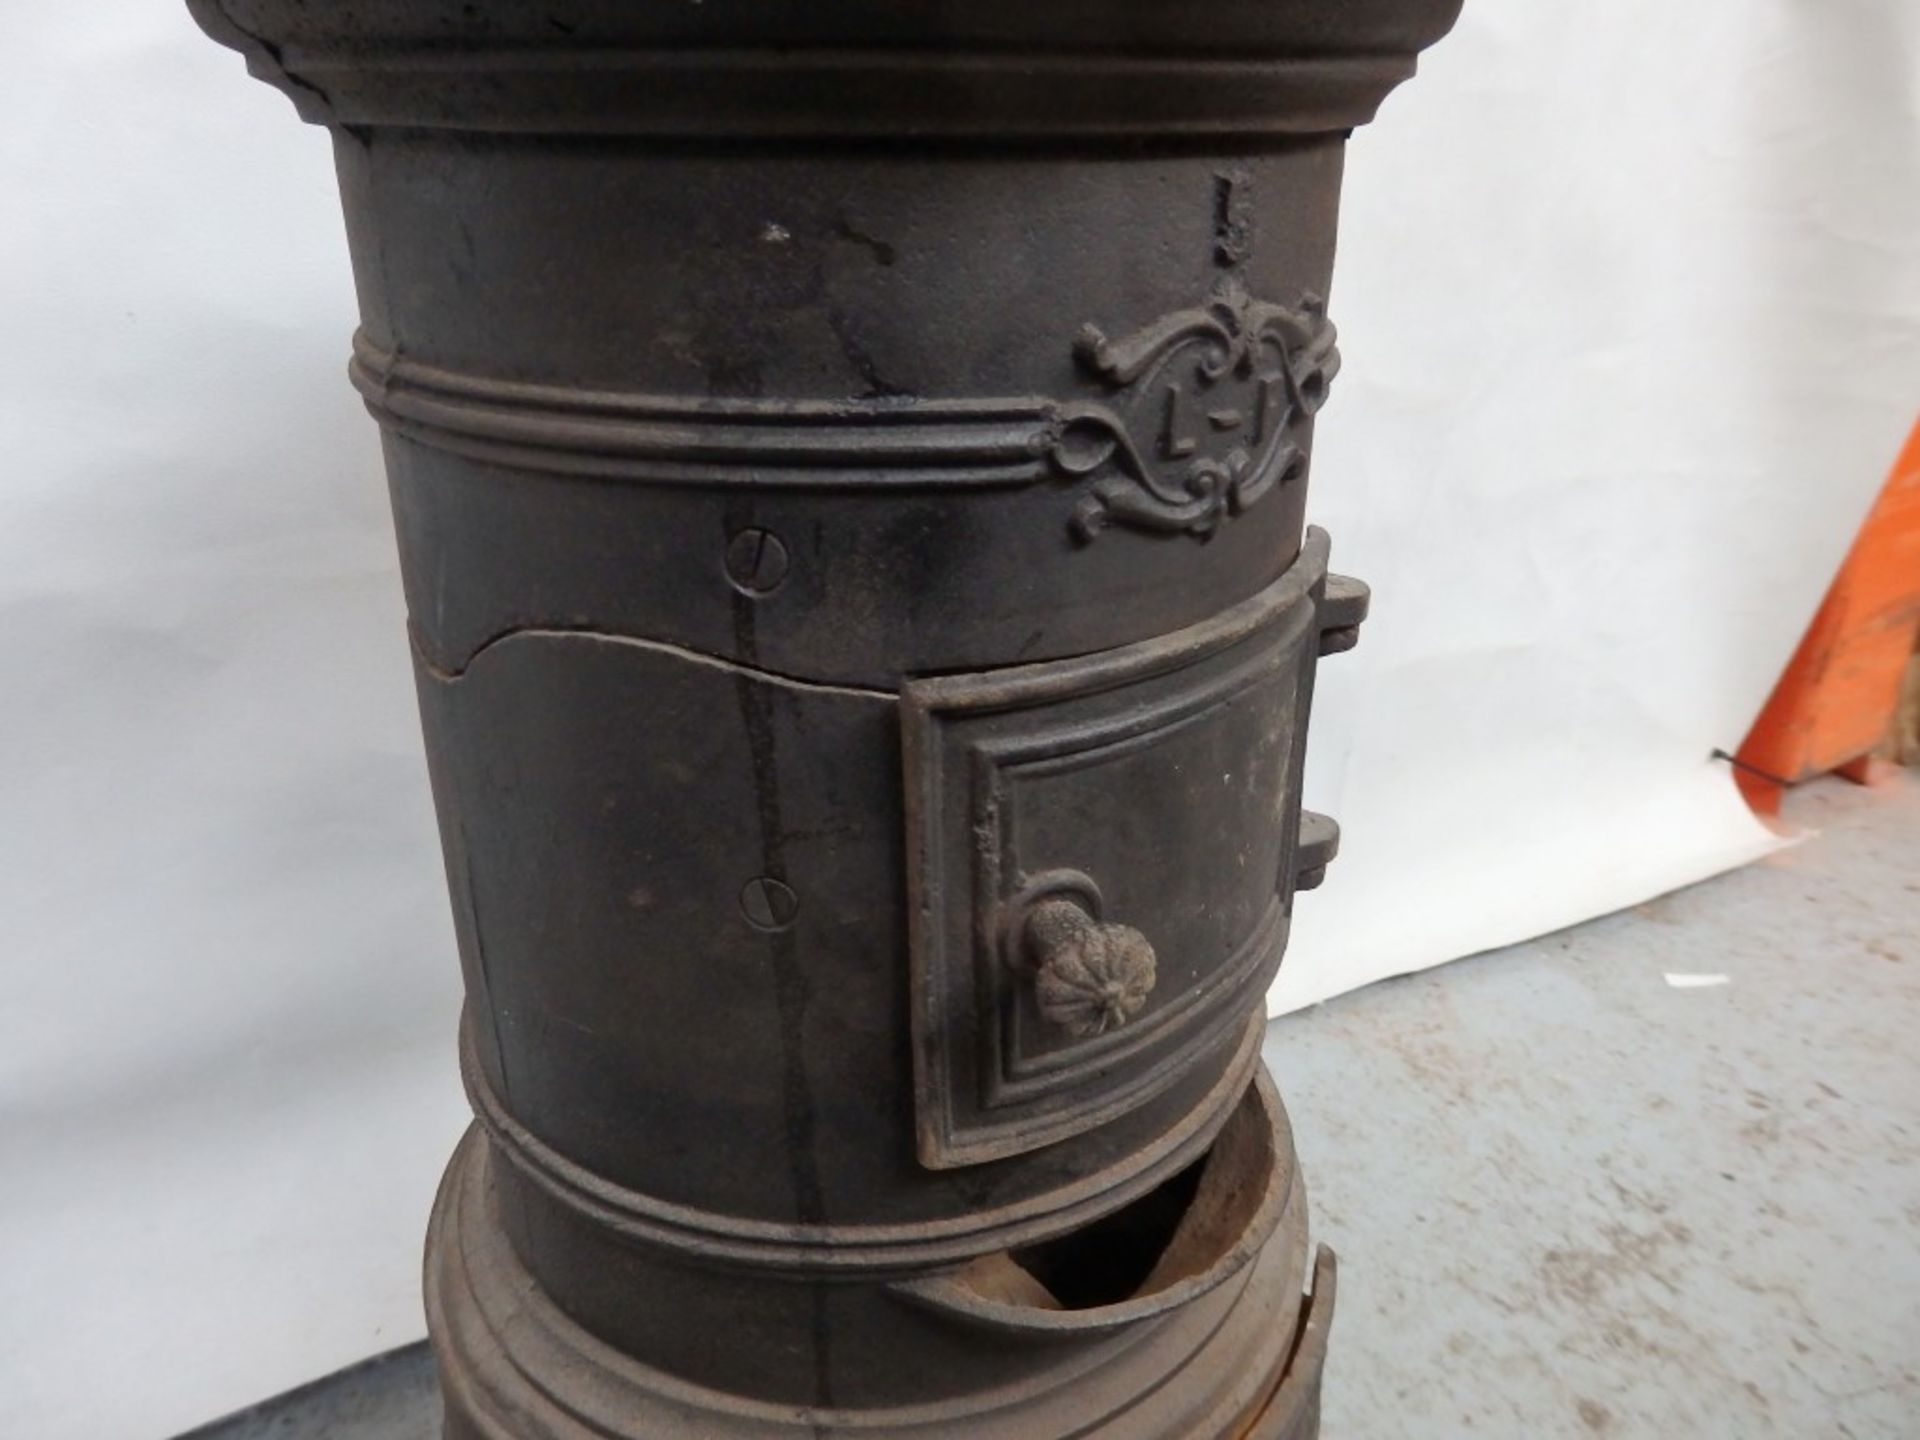 1 x Reclaimed Antique Cast Iron Potbelly Wood Burner / Stove - Dimensions: H61, Diameter 30cm - - Image 6 of 9